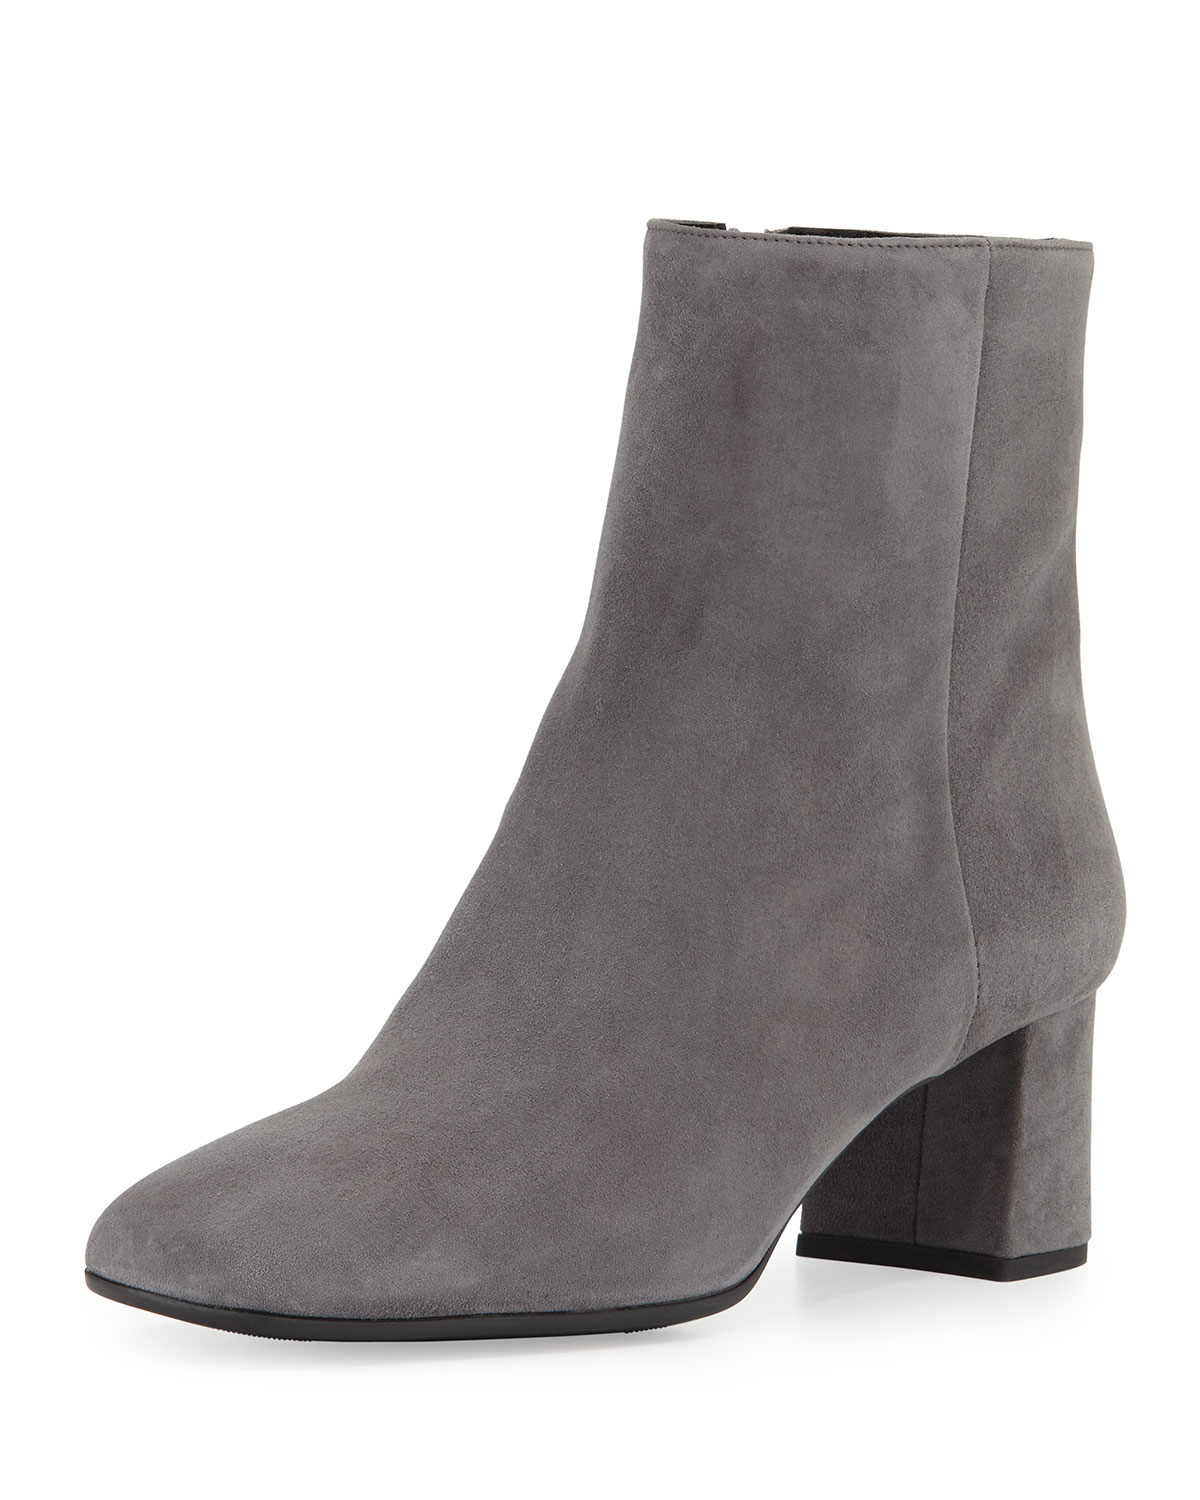 Prada Suede Square-Toe Ankle Boot in Gray (NEBIA) | Lyst